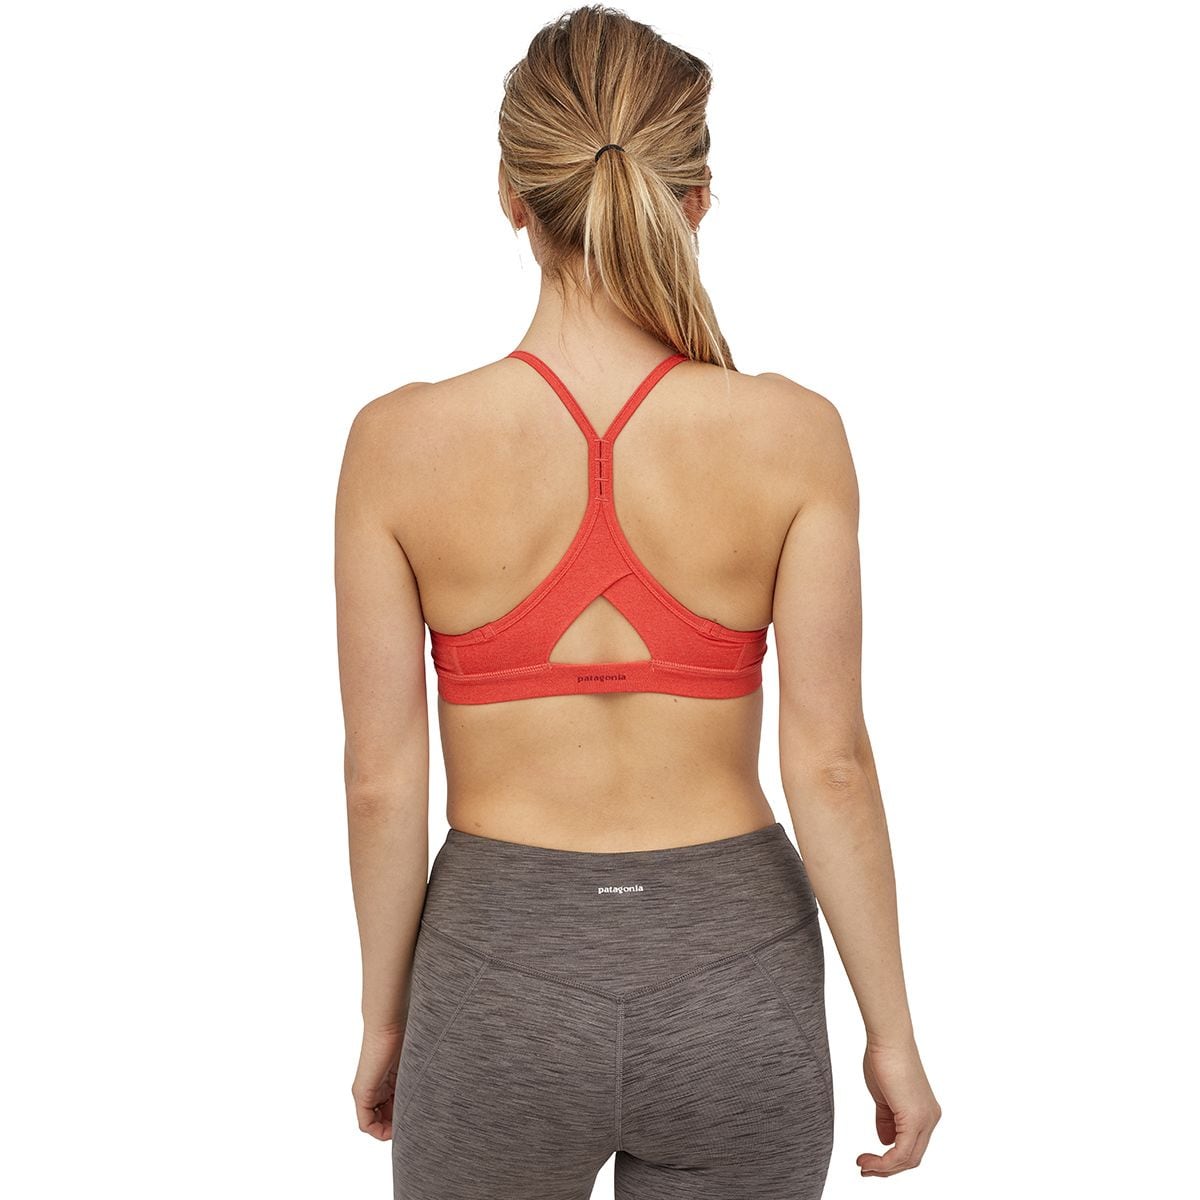 Patagonia Cross Beta Sports Bra - Women's for Sale, Reviews, Deals and  Guides